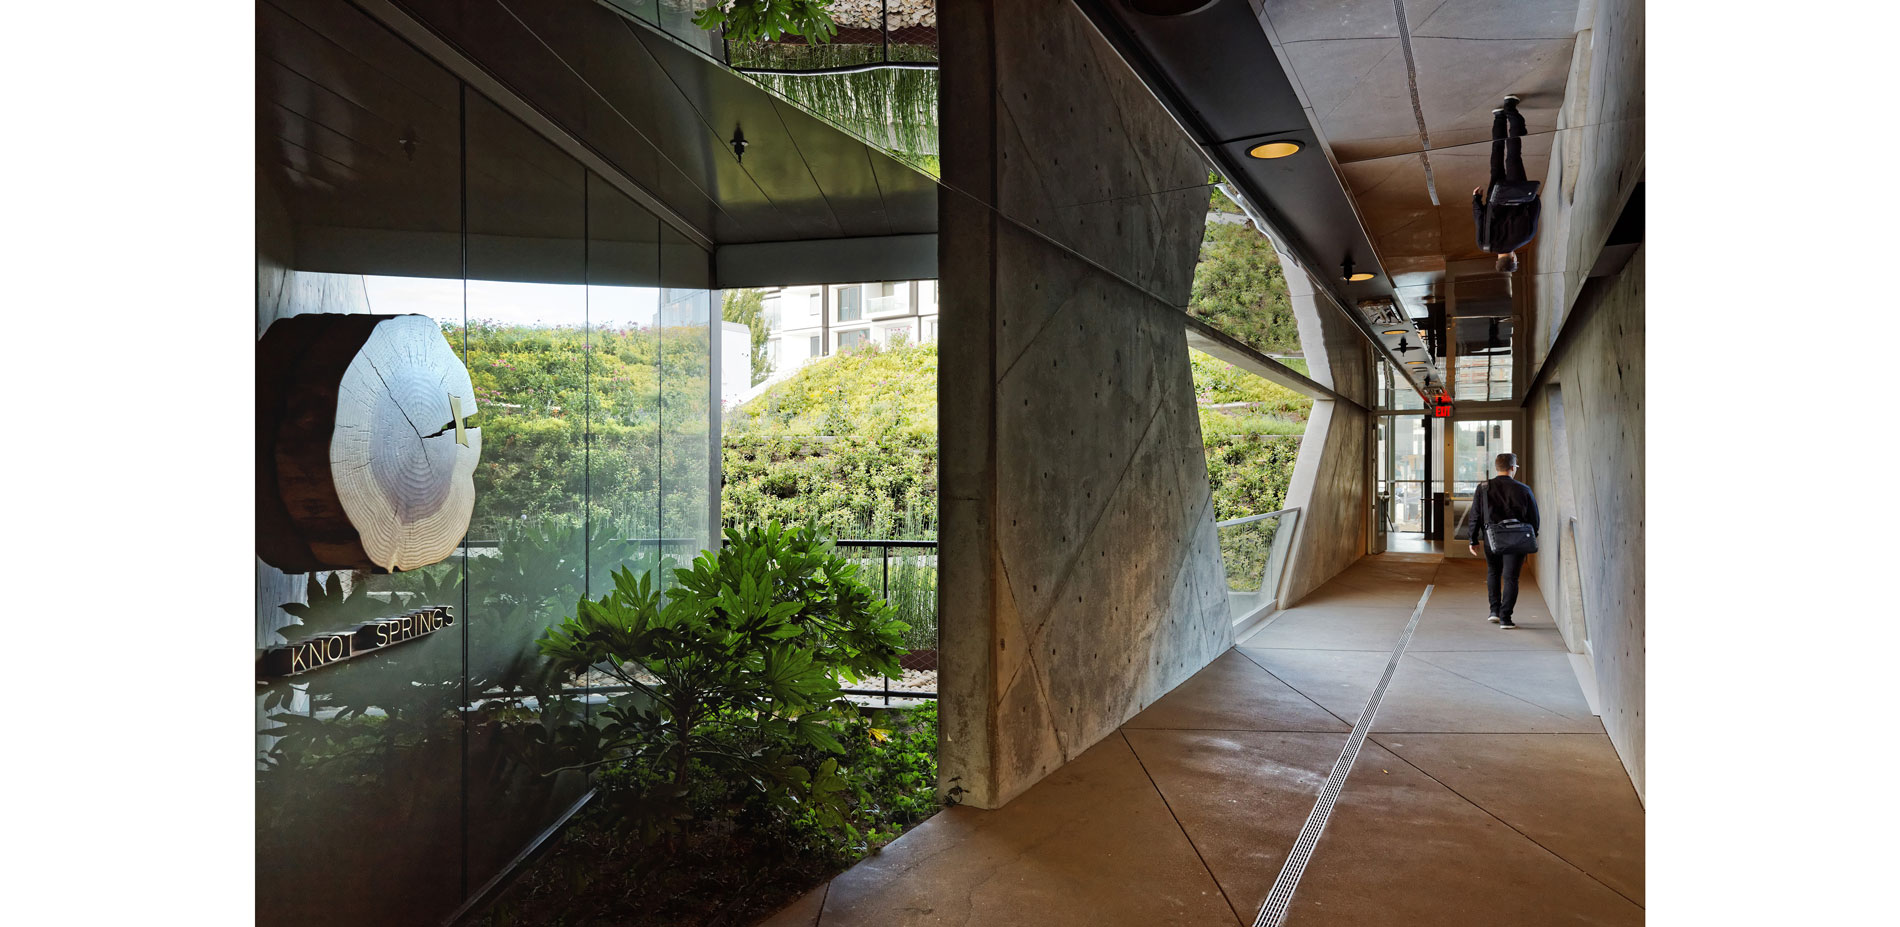 The sloping green roof encompass outdoor walkways that cut through the building, creating a lush environment. The boundary between building and landsc…